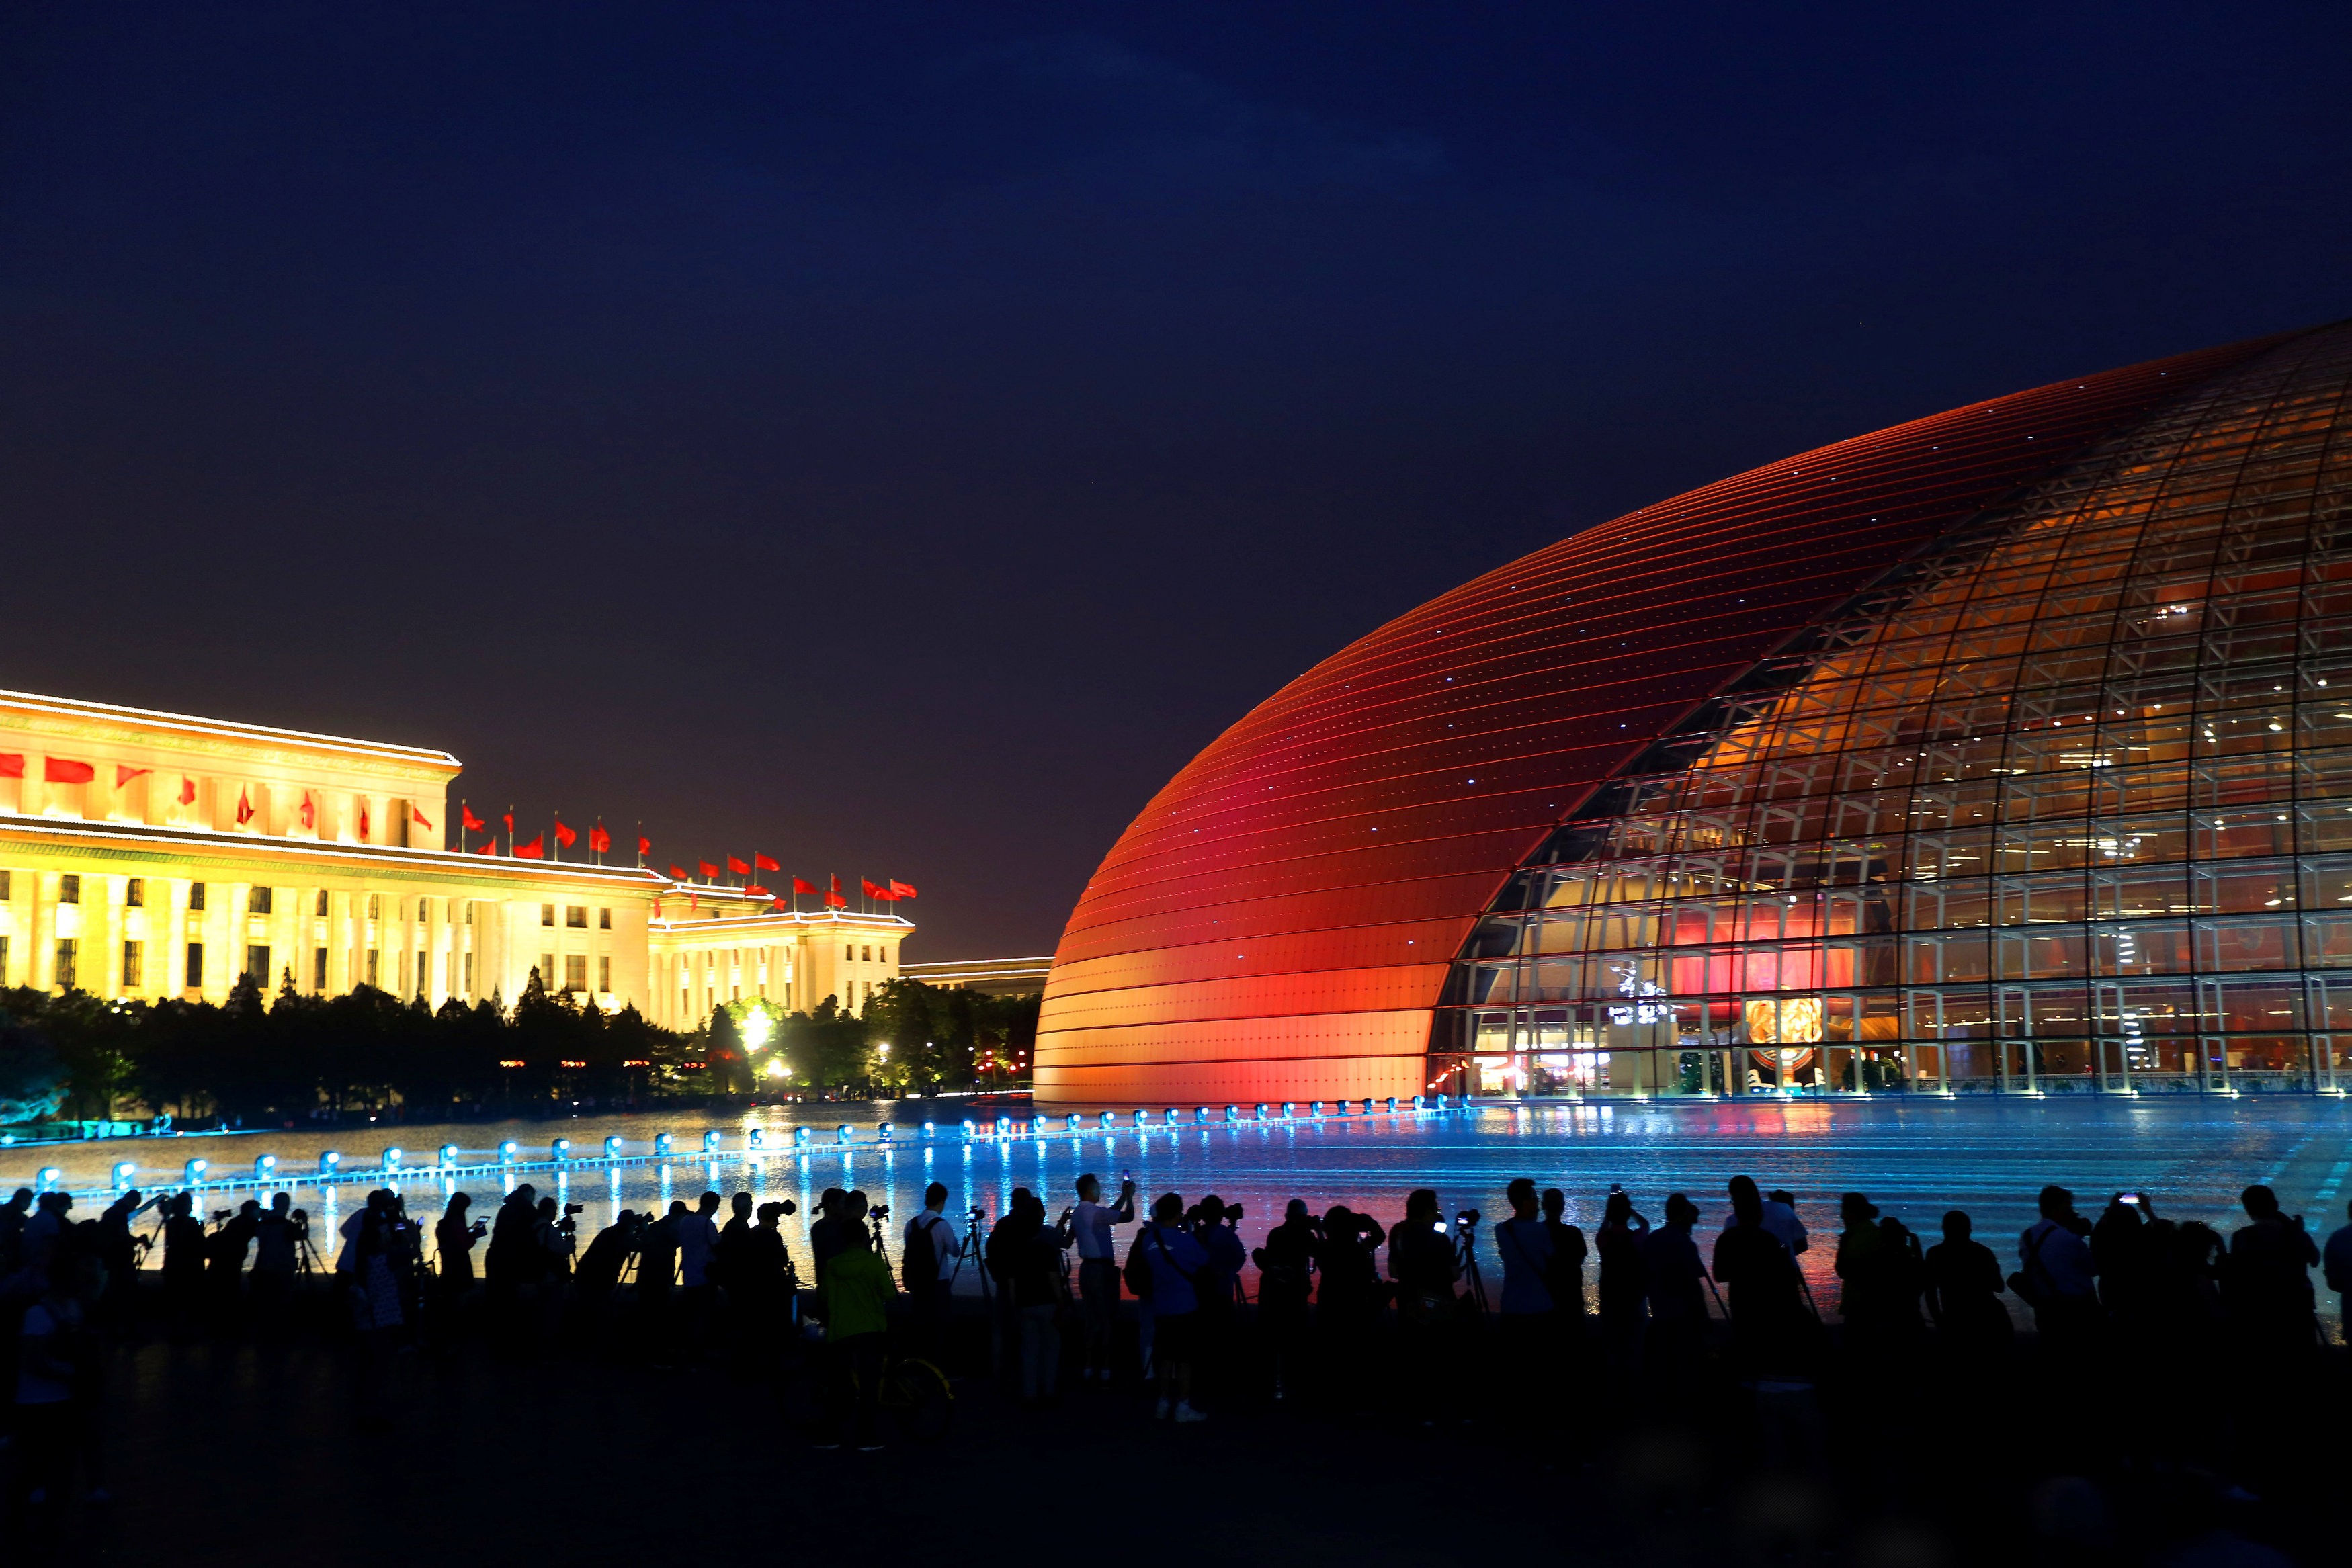 An illuminated Grand National Theatre draws admiring crowds ahead of the Belt and Road Forum in Beijing, on May 12. Western classical music and grand opera are integral parts of cultural life in Beijing and Shanghai. Photo: Reuters